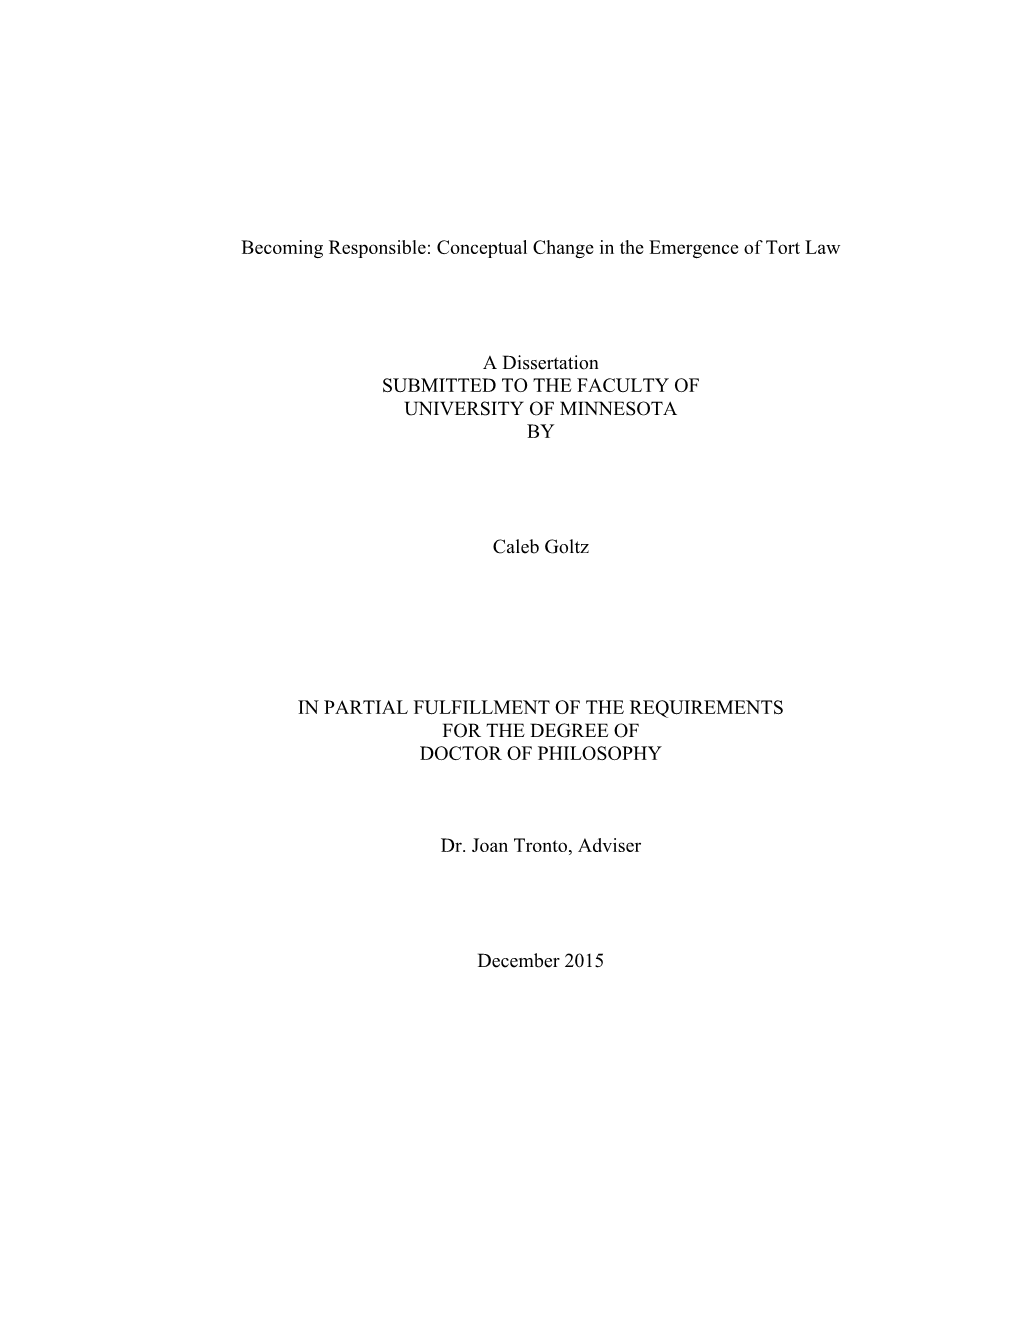 Conceptual Change in the Emergence of Tort Law